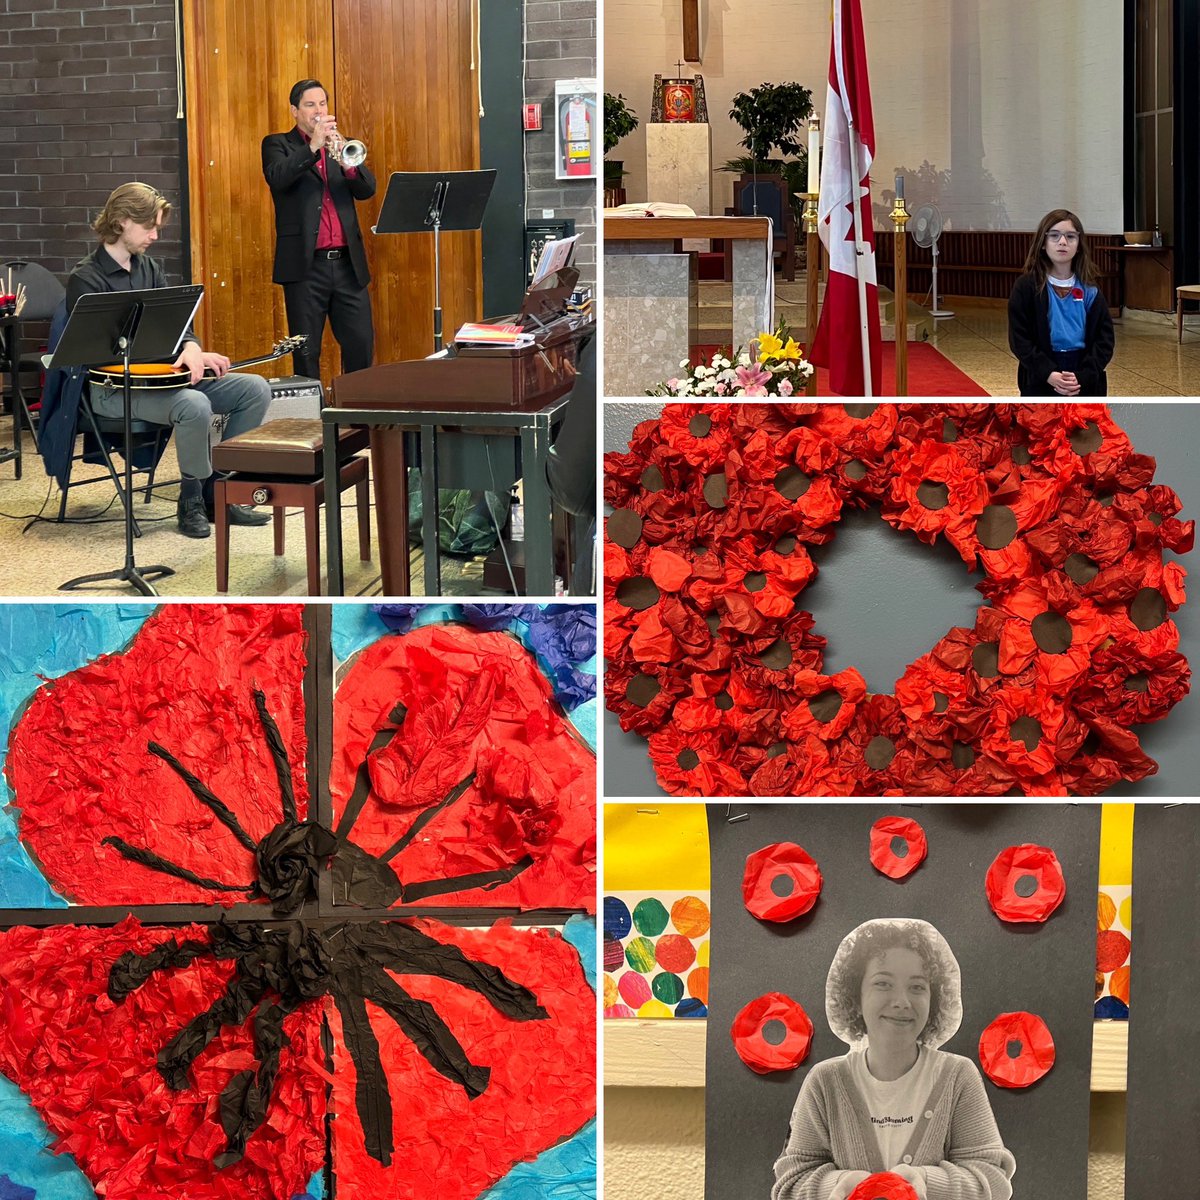 This week we honoured and remembered the people who served and continue to serve in the Armed Forces. We thank you for your service and sacrifice. #RememberanceDay #WeRemember #Poppy #cisva @cisva